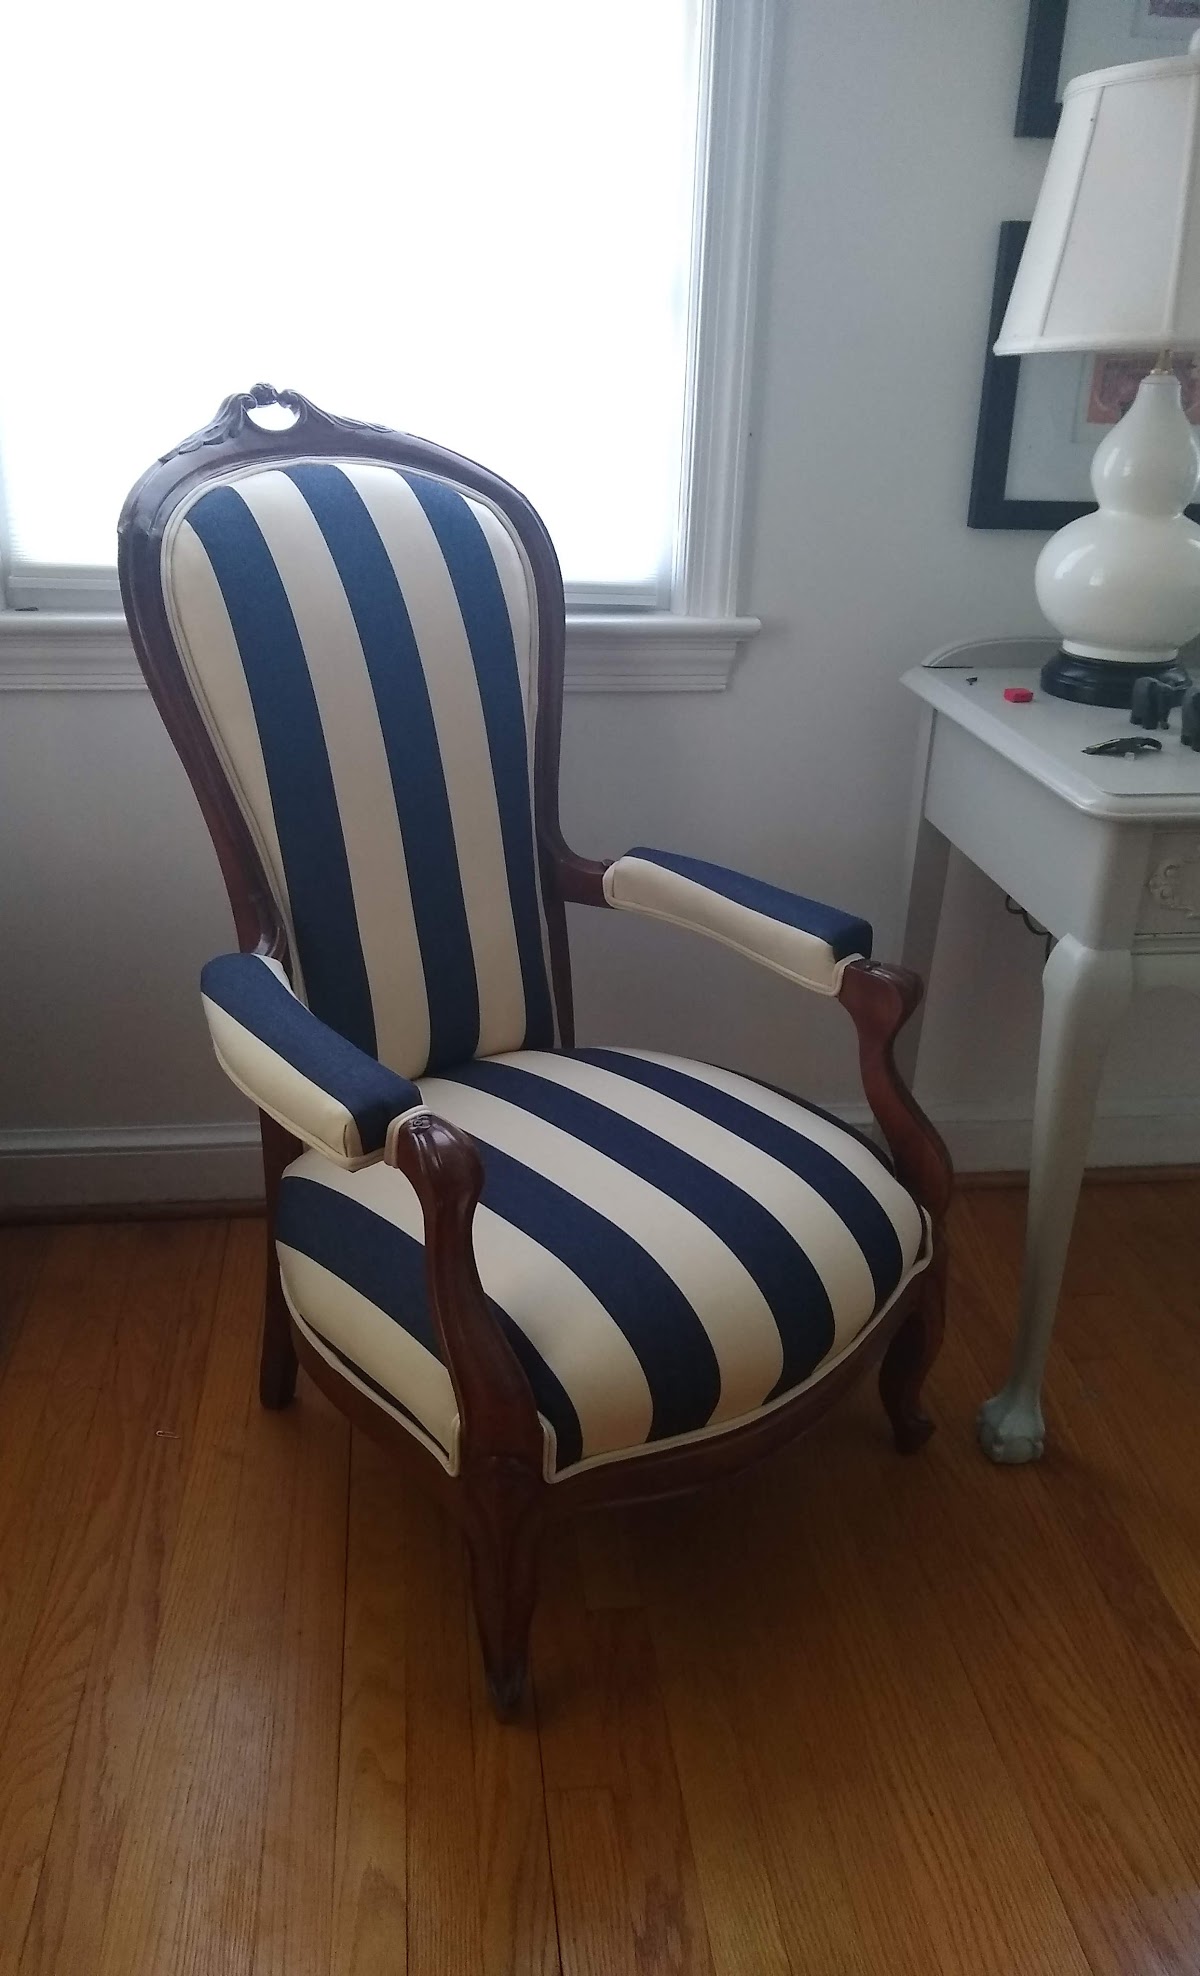 Santa Barbara Upholstery before and after upholstered classic chair project